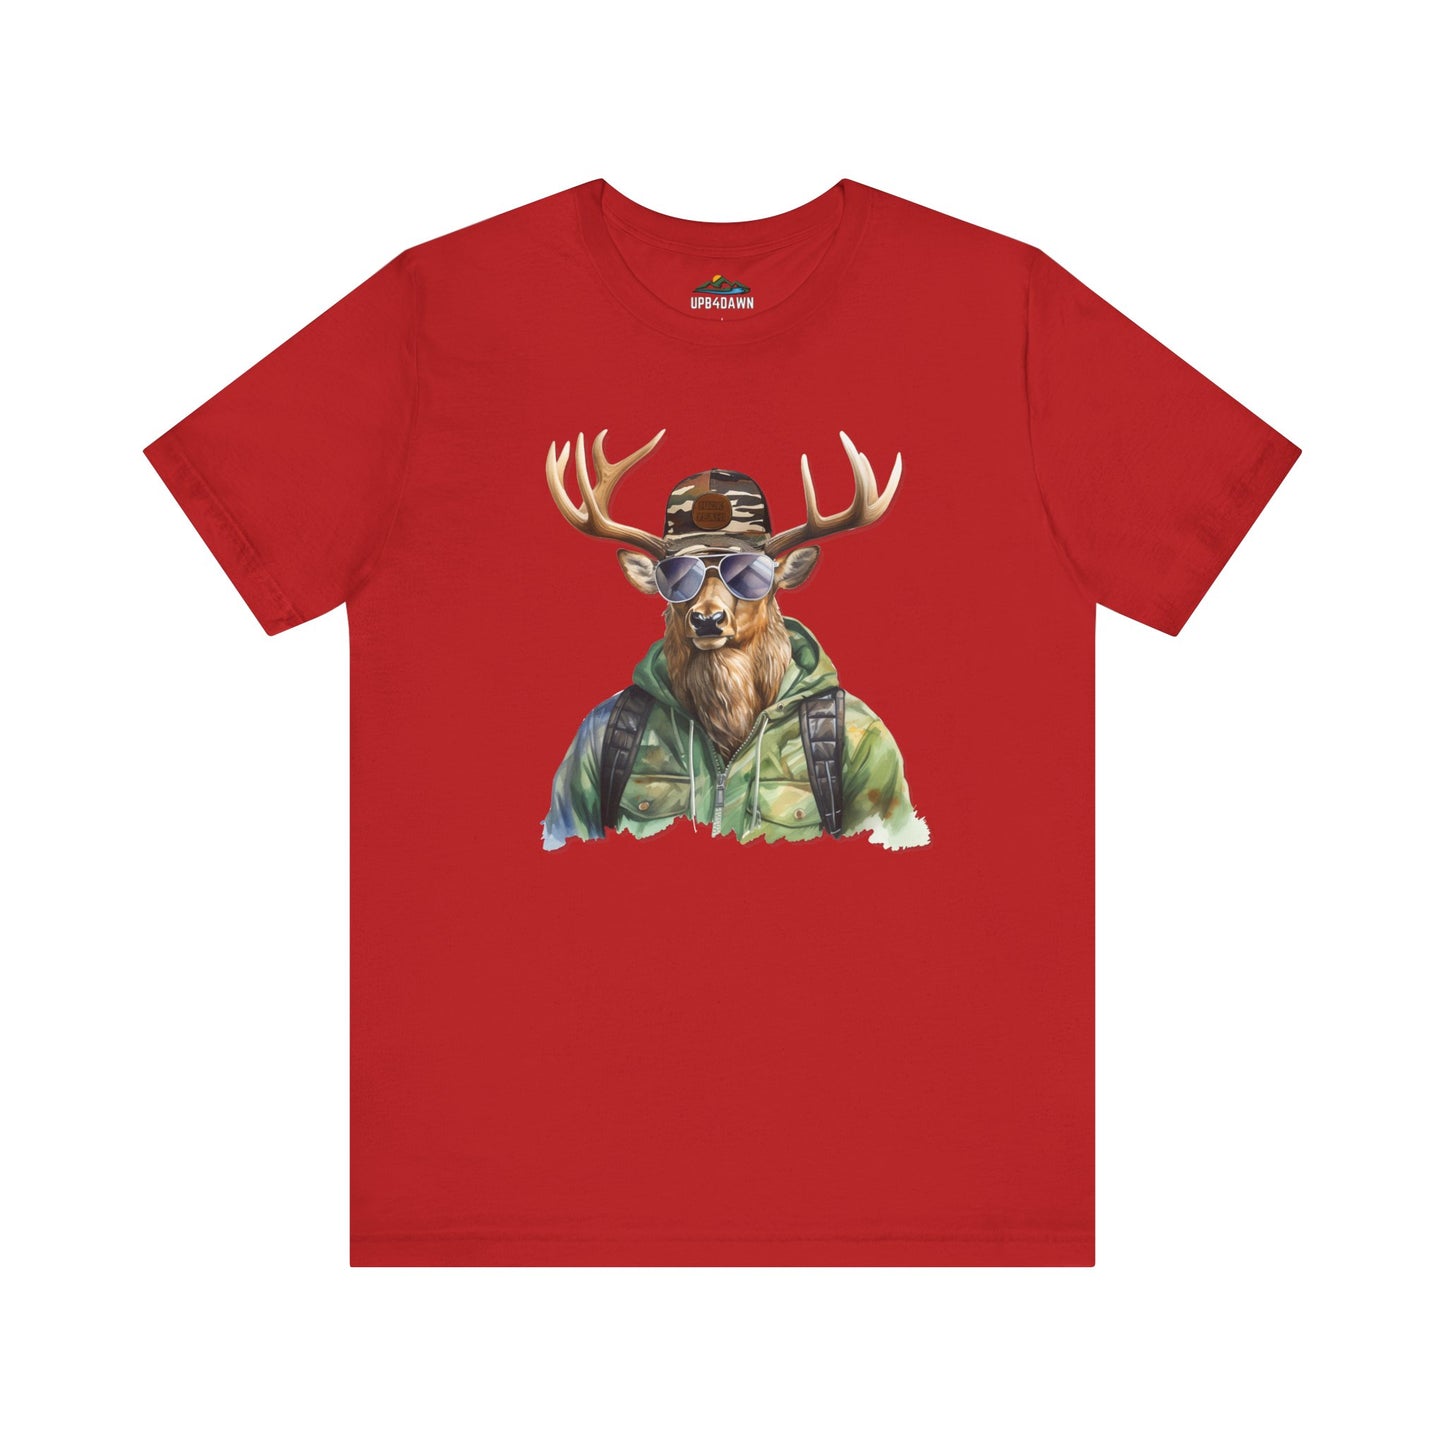 A Chill Hunter Big Buck - T-Shirt with a graphic print of a deer wearing a camouflage jacket and sunglasses, blending human and animal elements in an amusing hunter humor design.